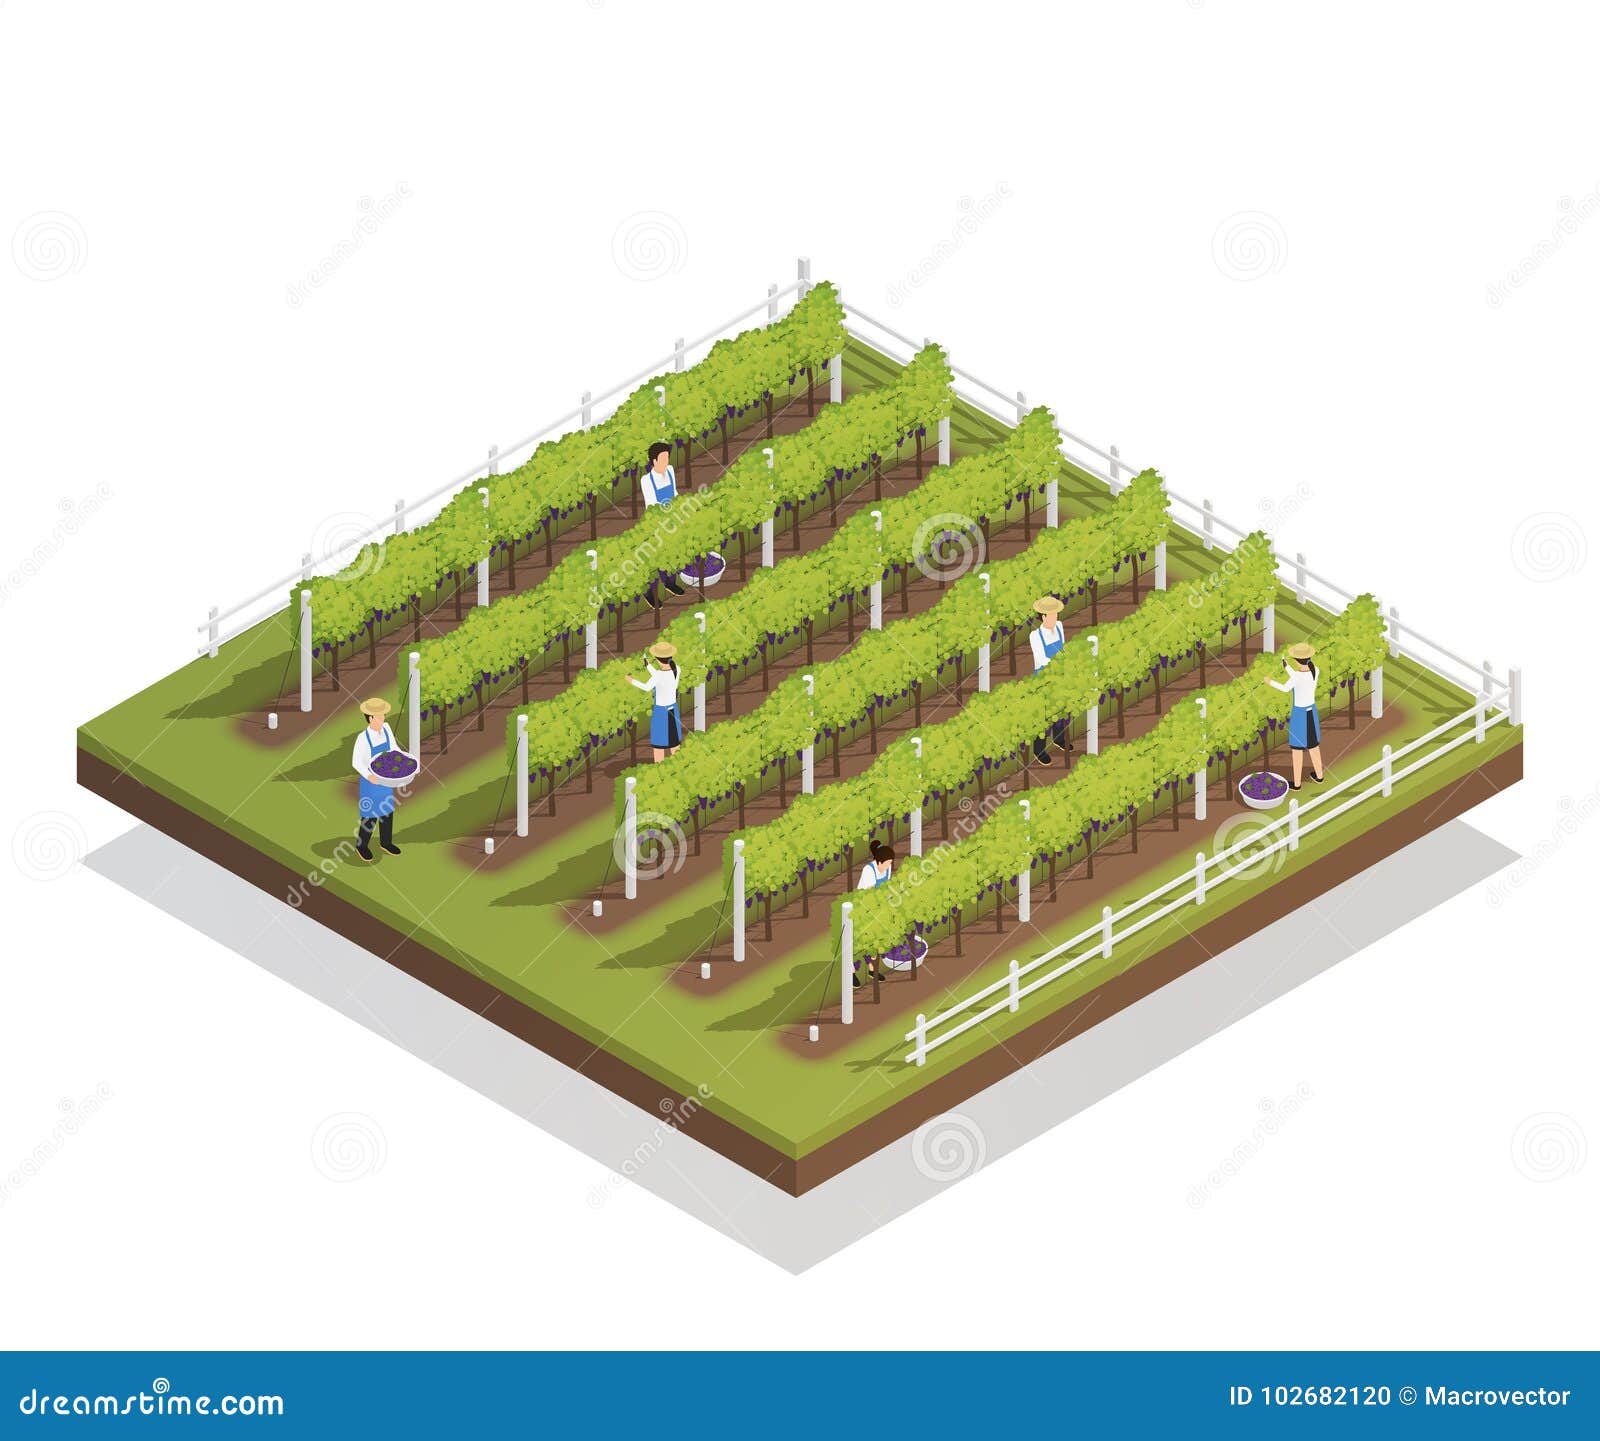 viticulture isometric composition